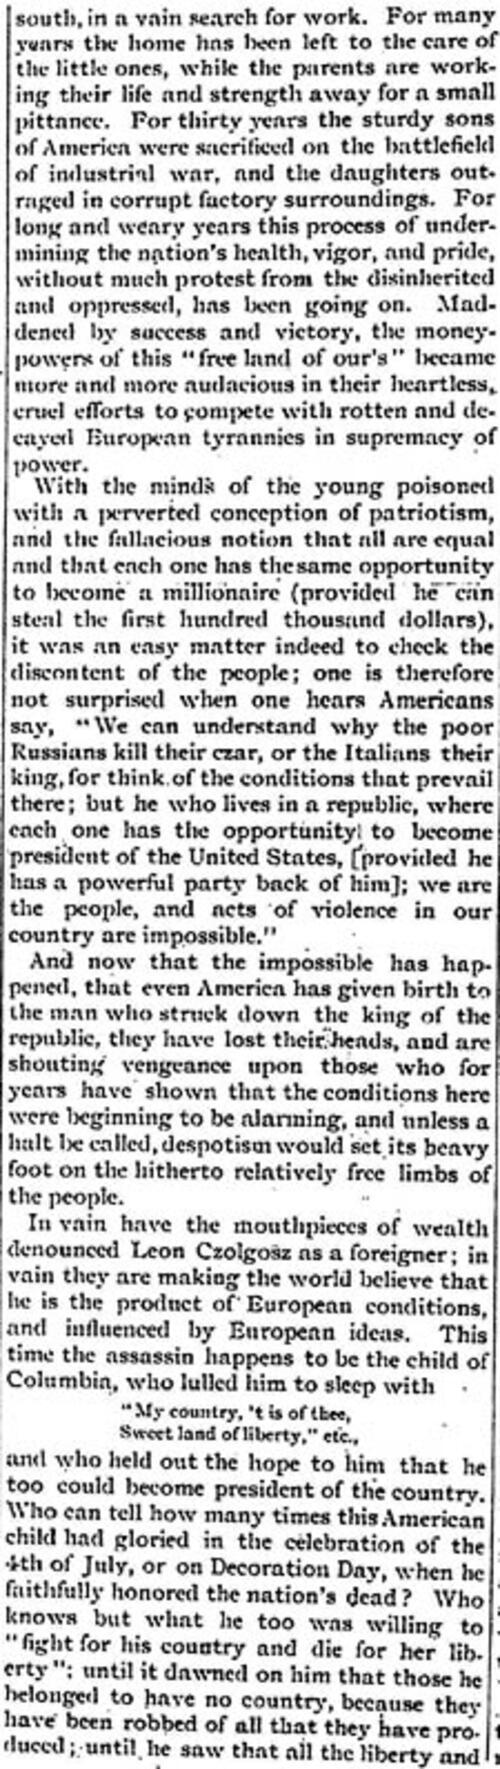 "The Tragedy at Buffalo" Article by Emma Goldman from Free Society, October 6, 1901, Page 2